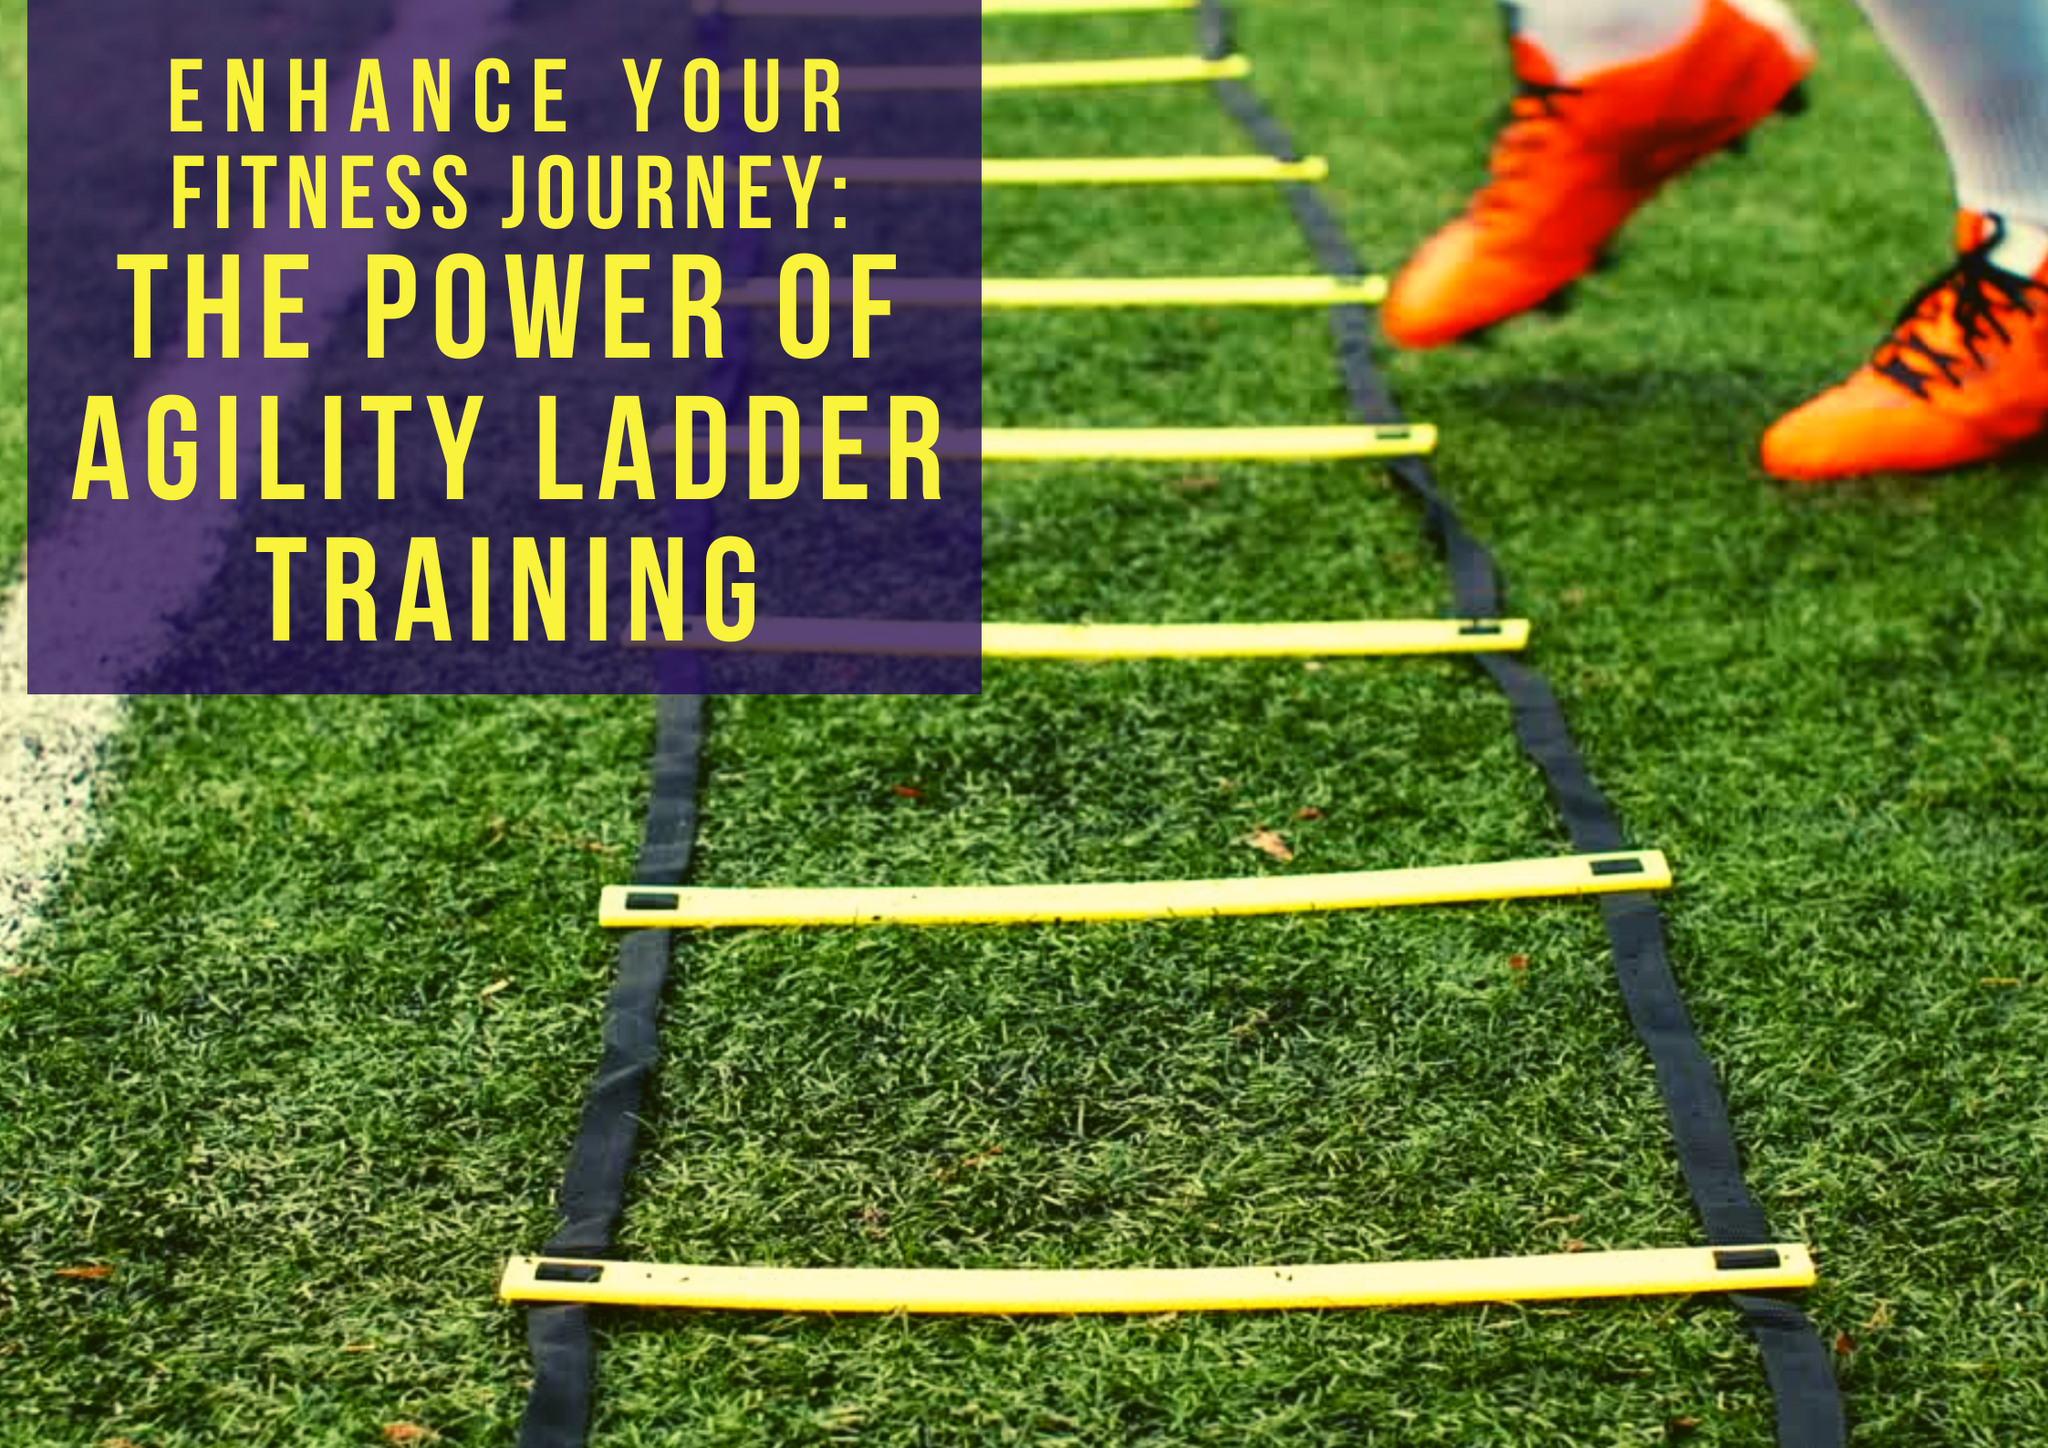 Enhance Your Fitness Journey:  The Power of Agility Ladder Training